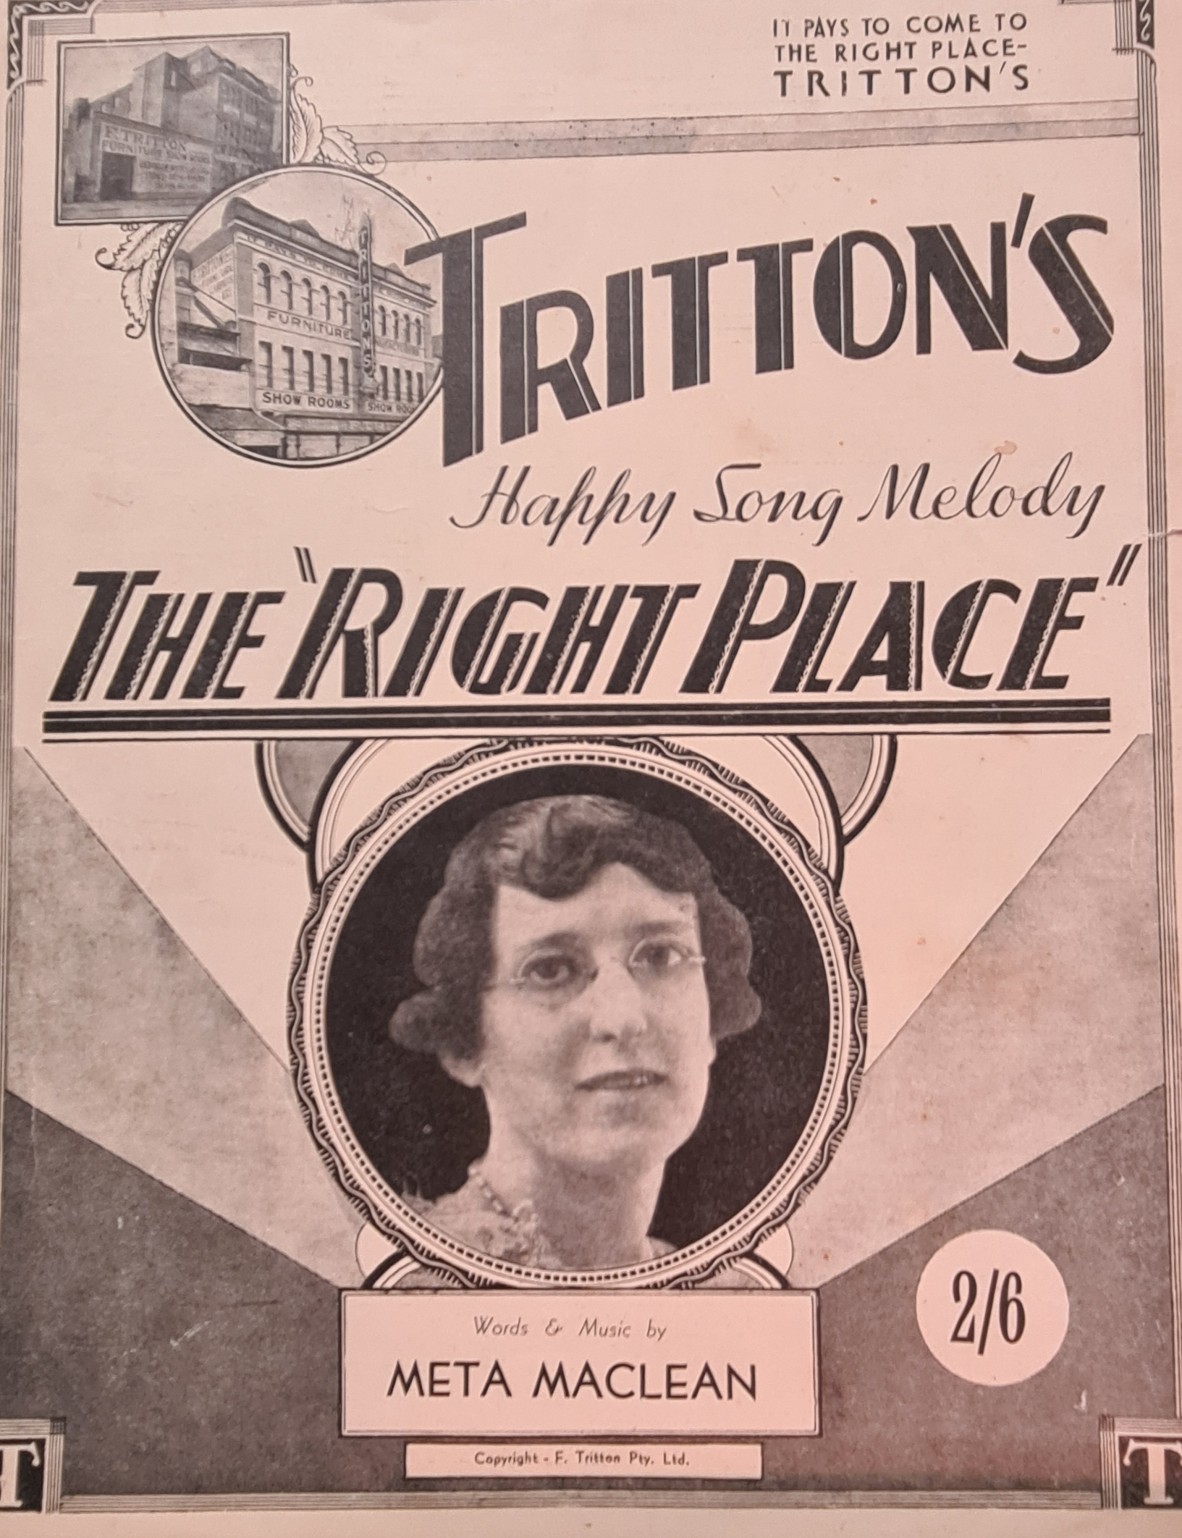 Sheet Music ‘The Right Place’, by Meta Maclean.